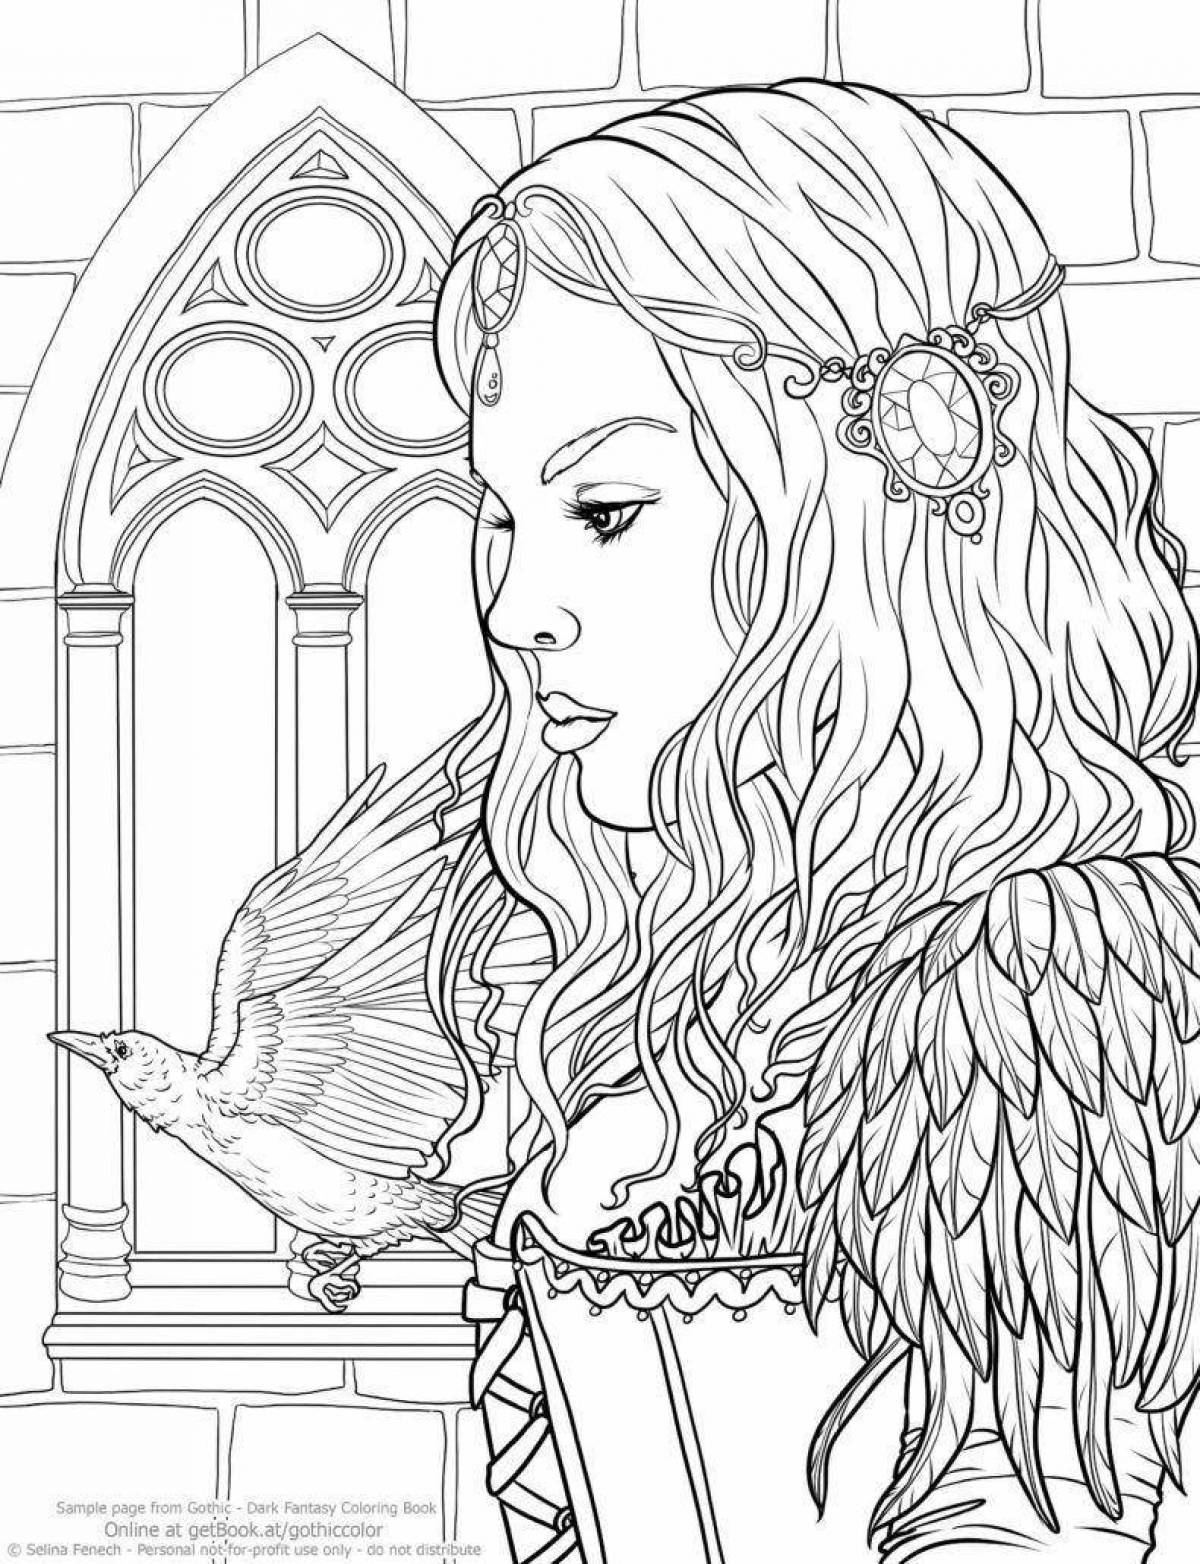 Gothic coloring book - unearthly